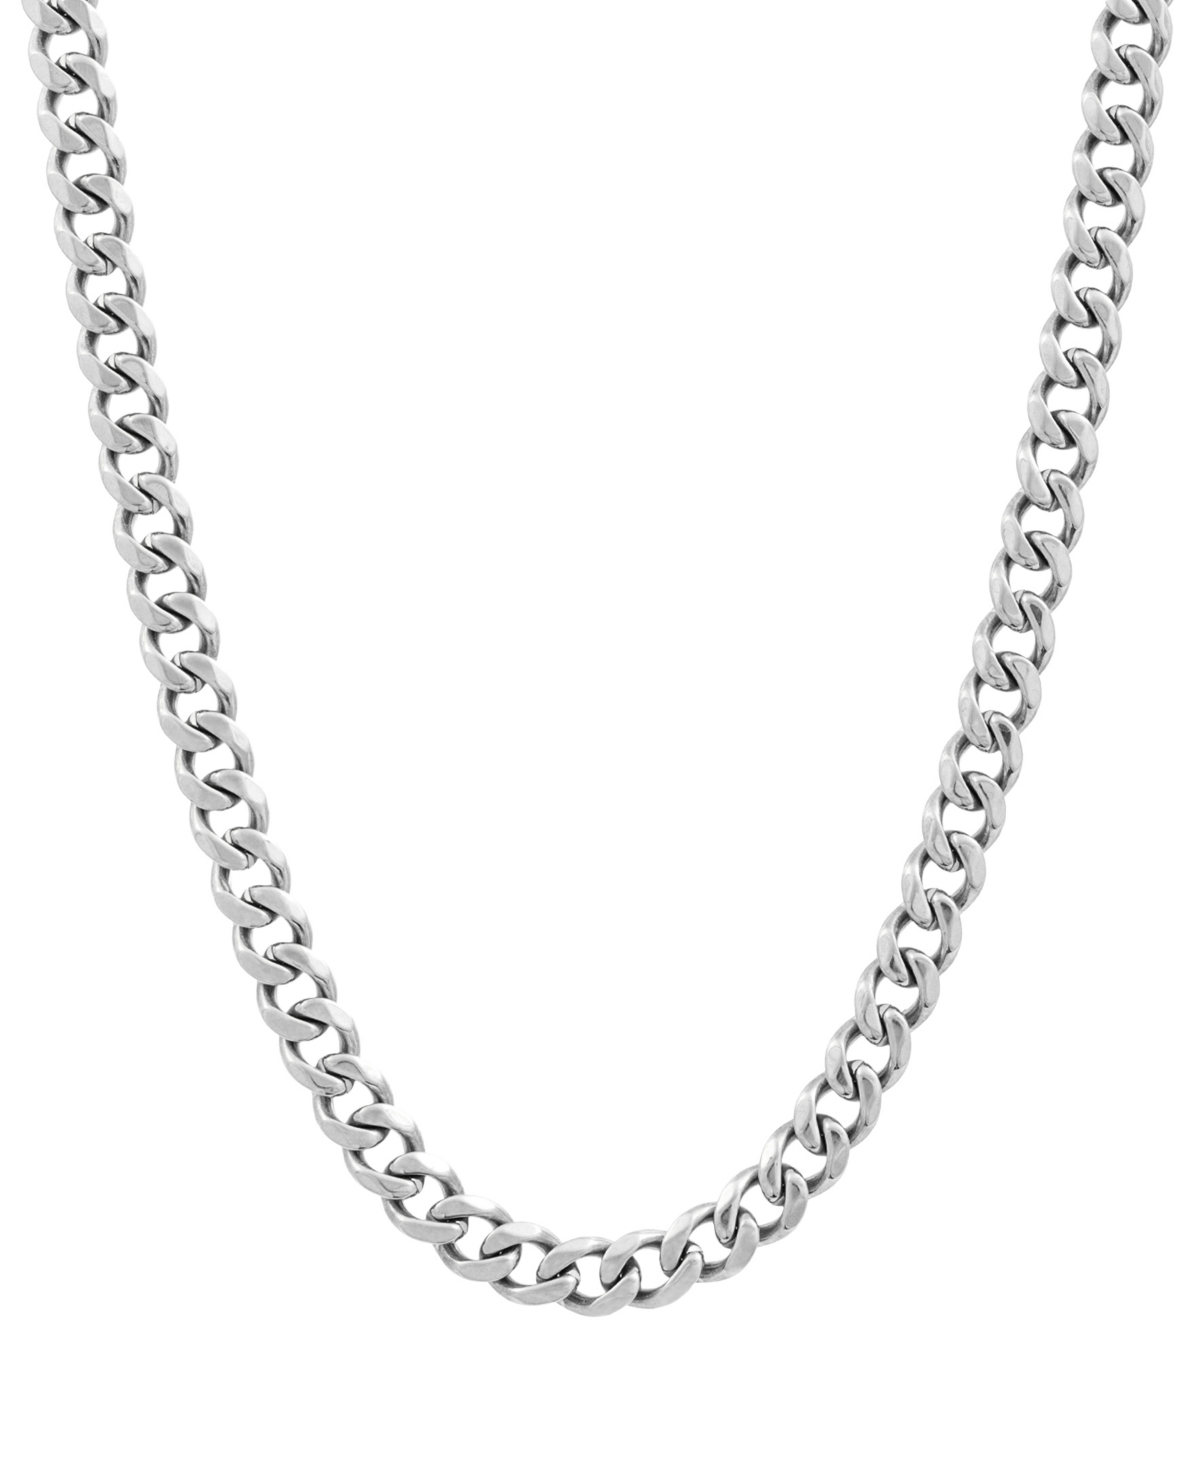 Smith Men's Flat Curb Link 24" Chain Necklace - Stainless Steel